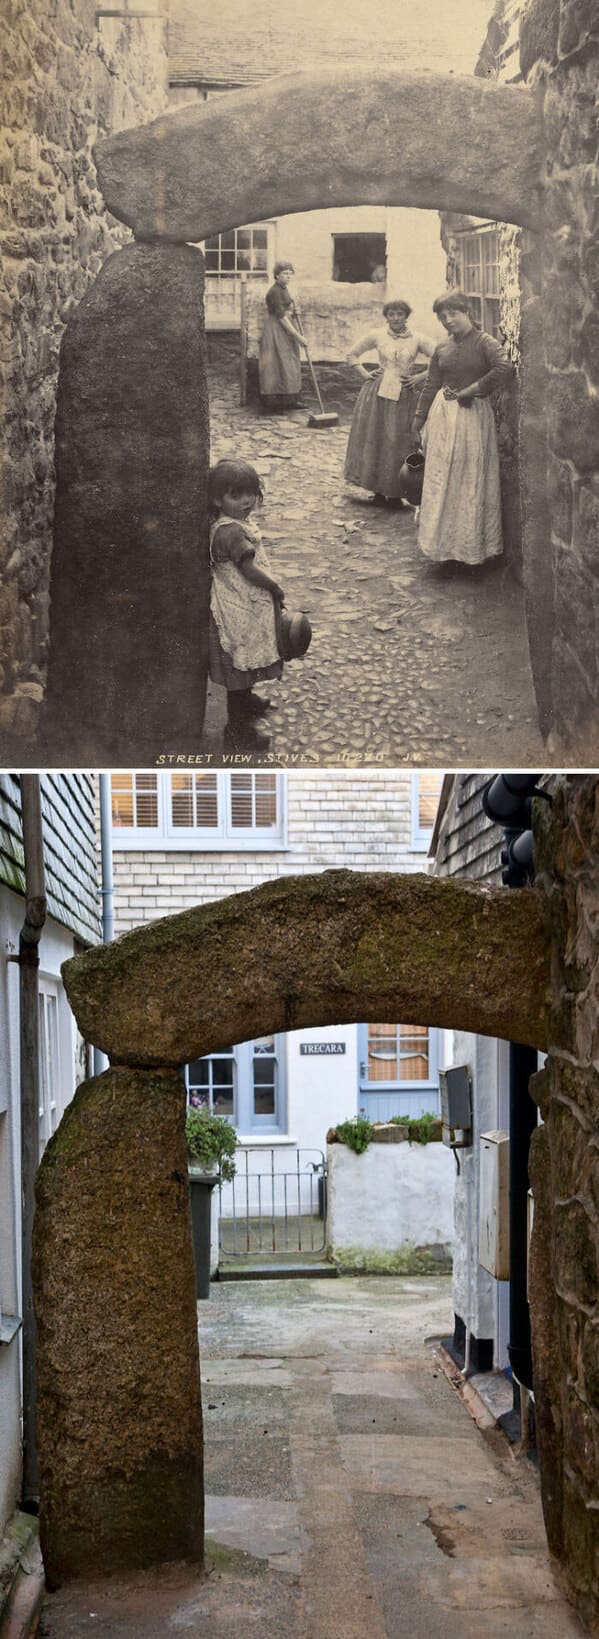 “Hick’s Court, St Ives, England – 1888 And Today”